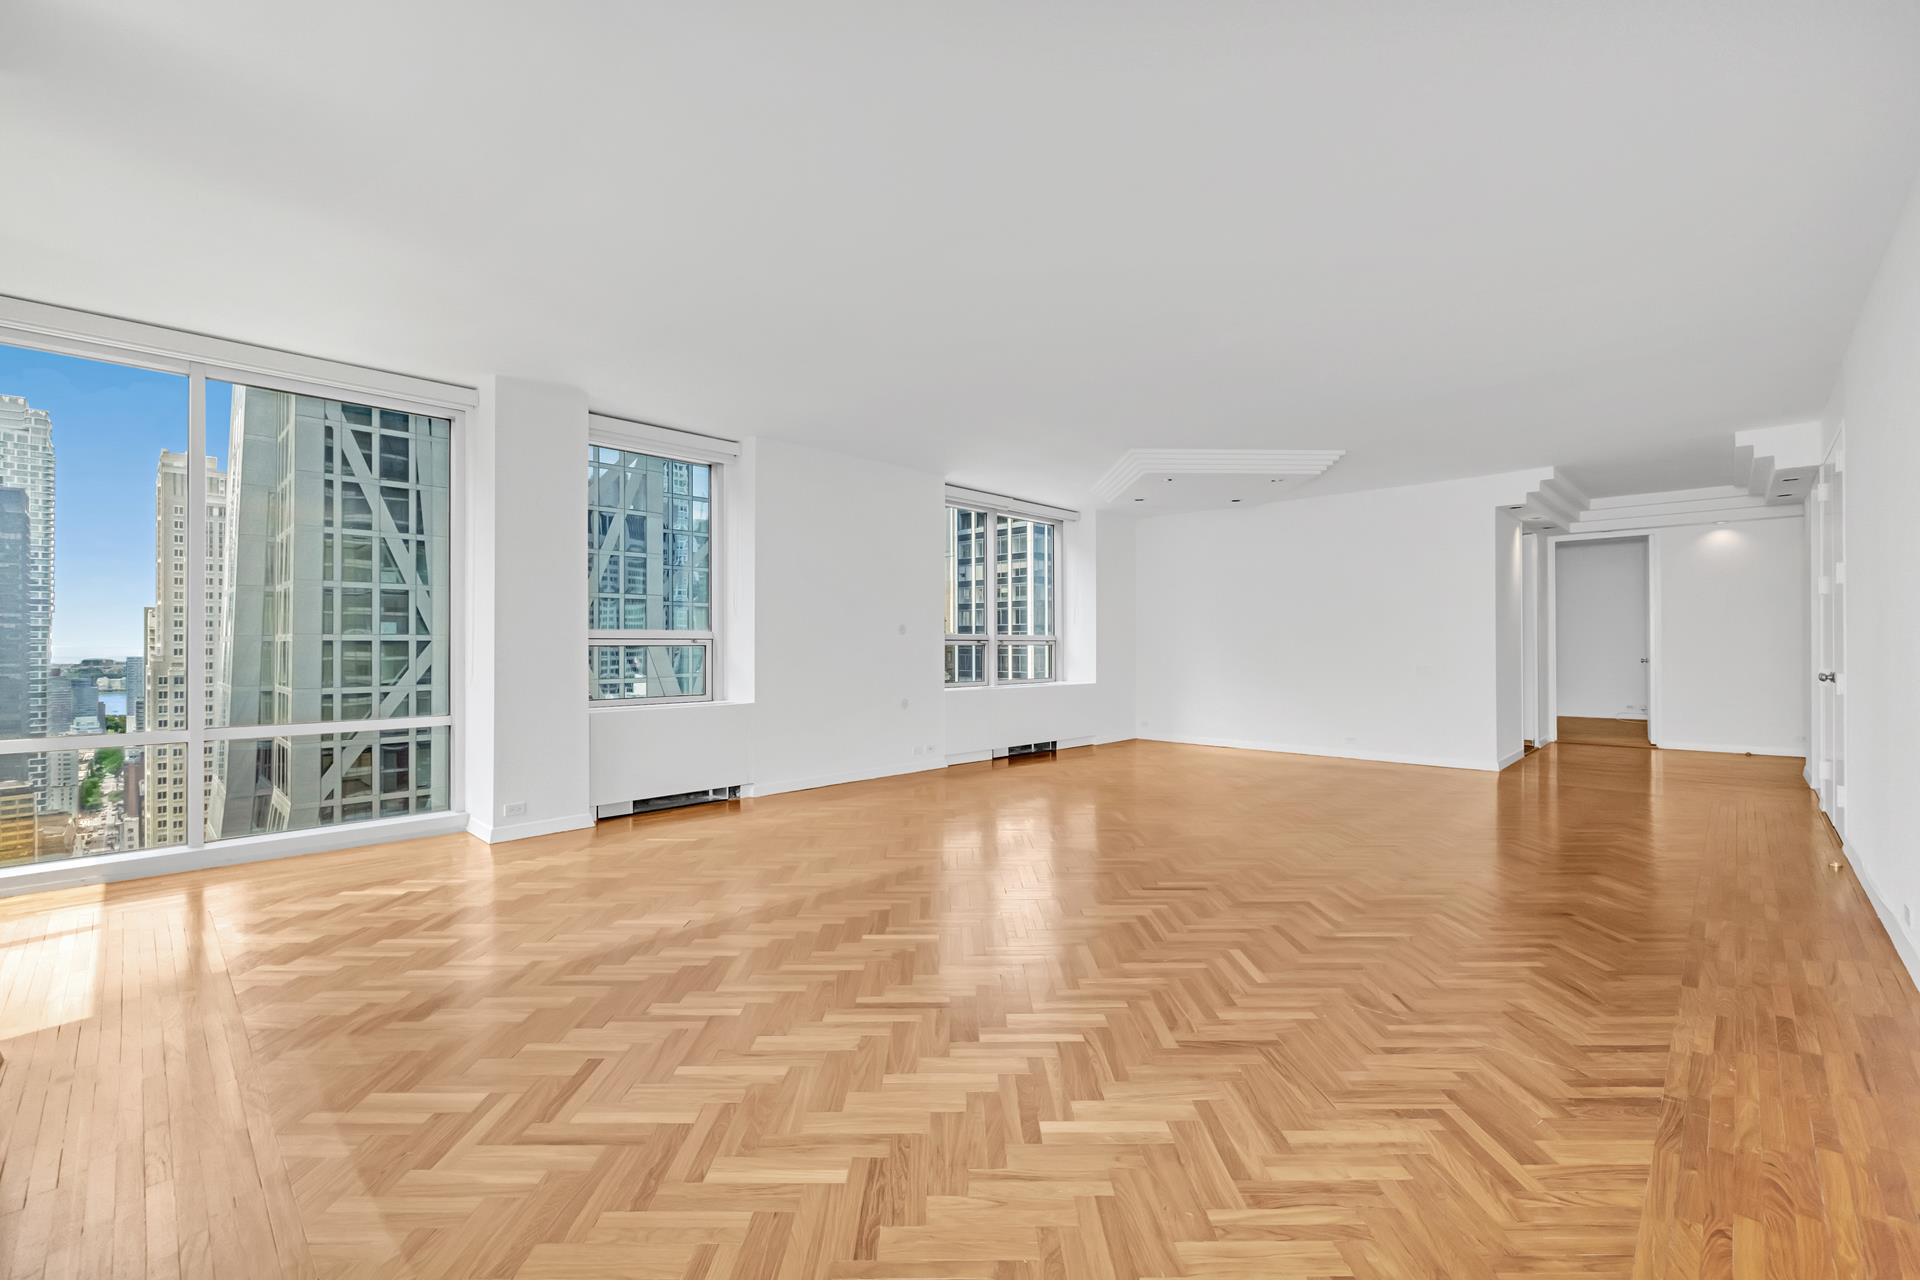 15 West 53rd Street 31D, Chelsea And Clinton, Downtown, NYC - 2 Bedrooms  
2.5 Bathrooms  
4 Rooms - 